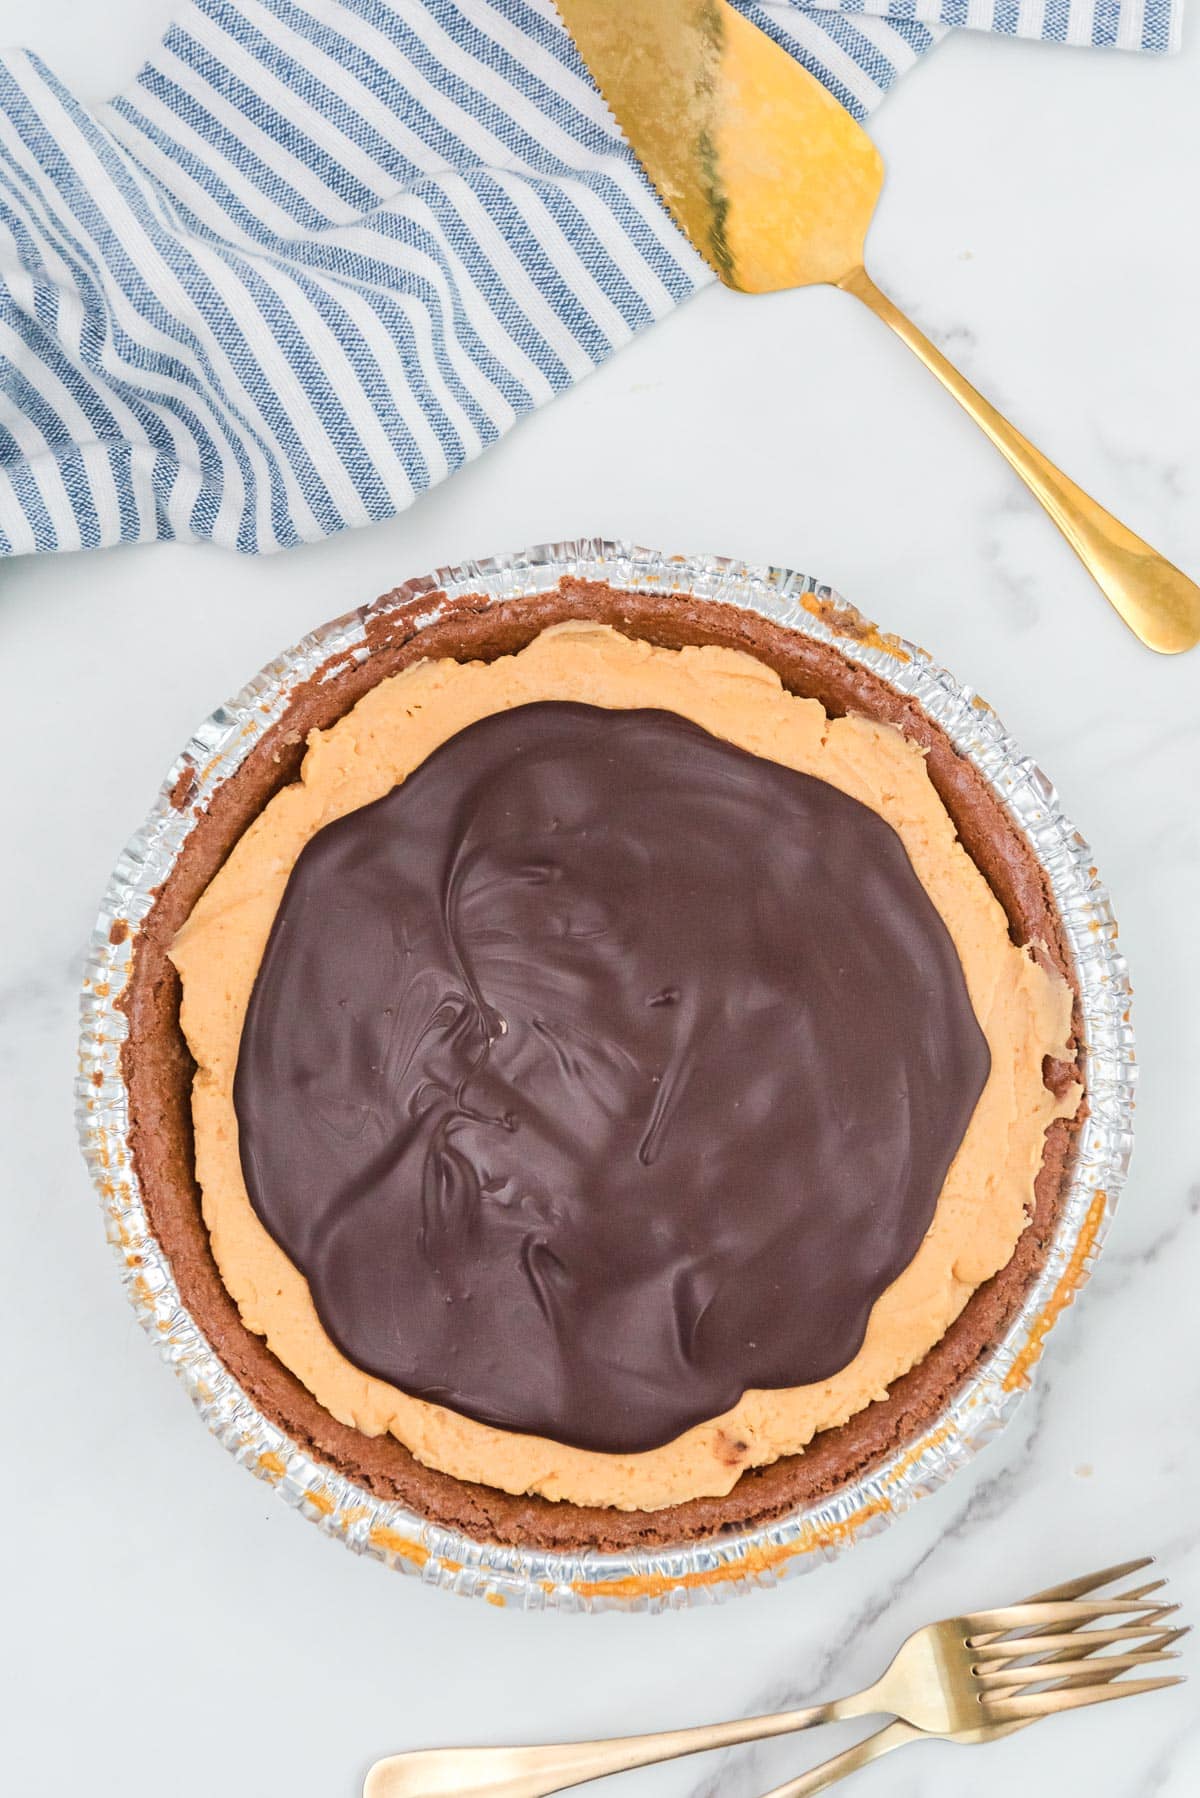 A chocolate-covered buckeye pie after chilling with a firm chocolate topping on a counter.